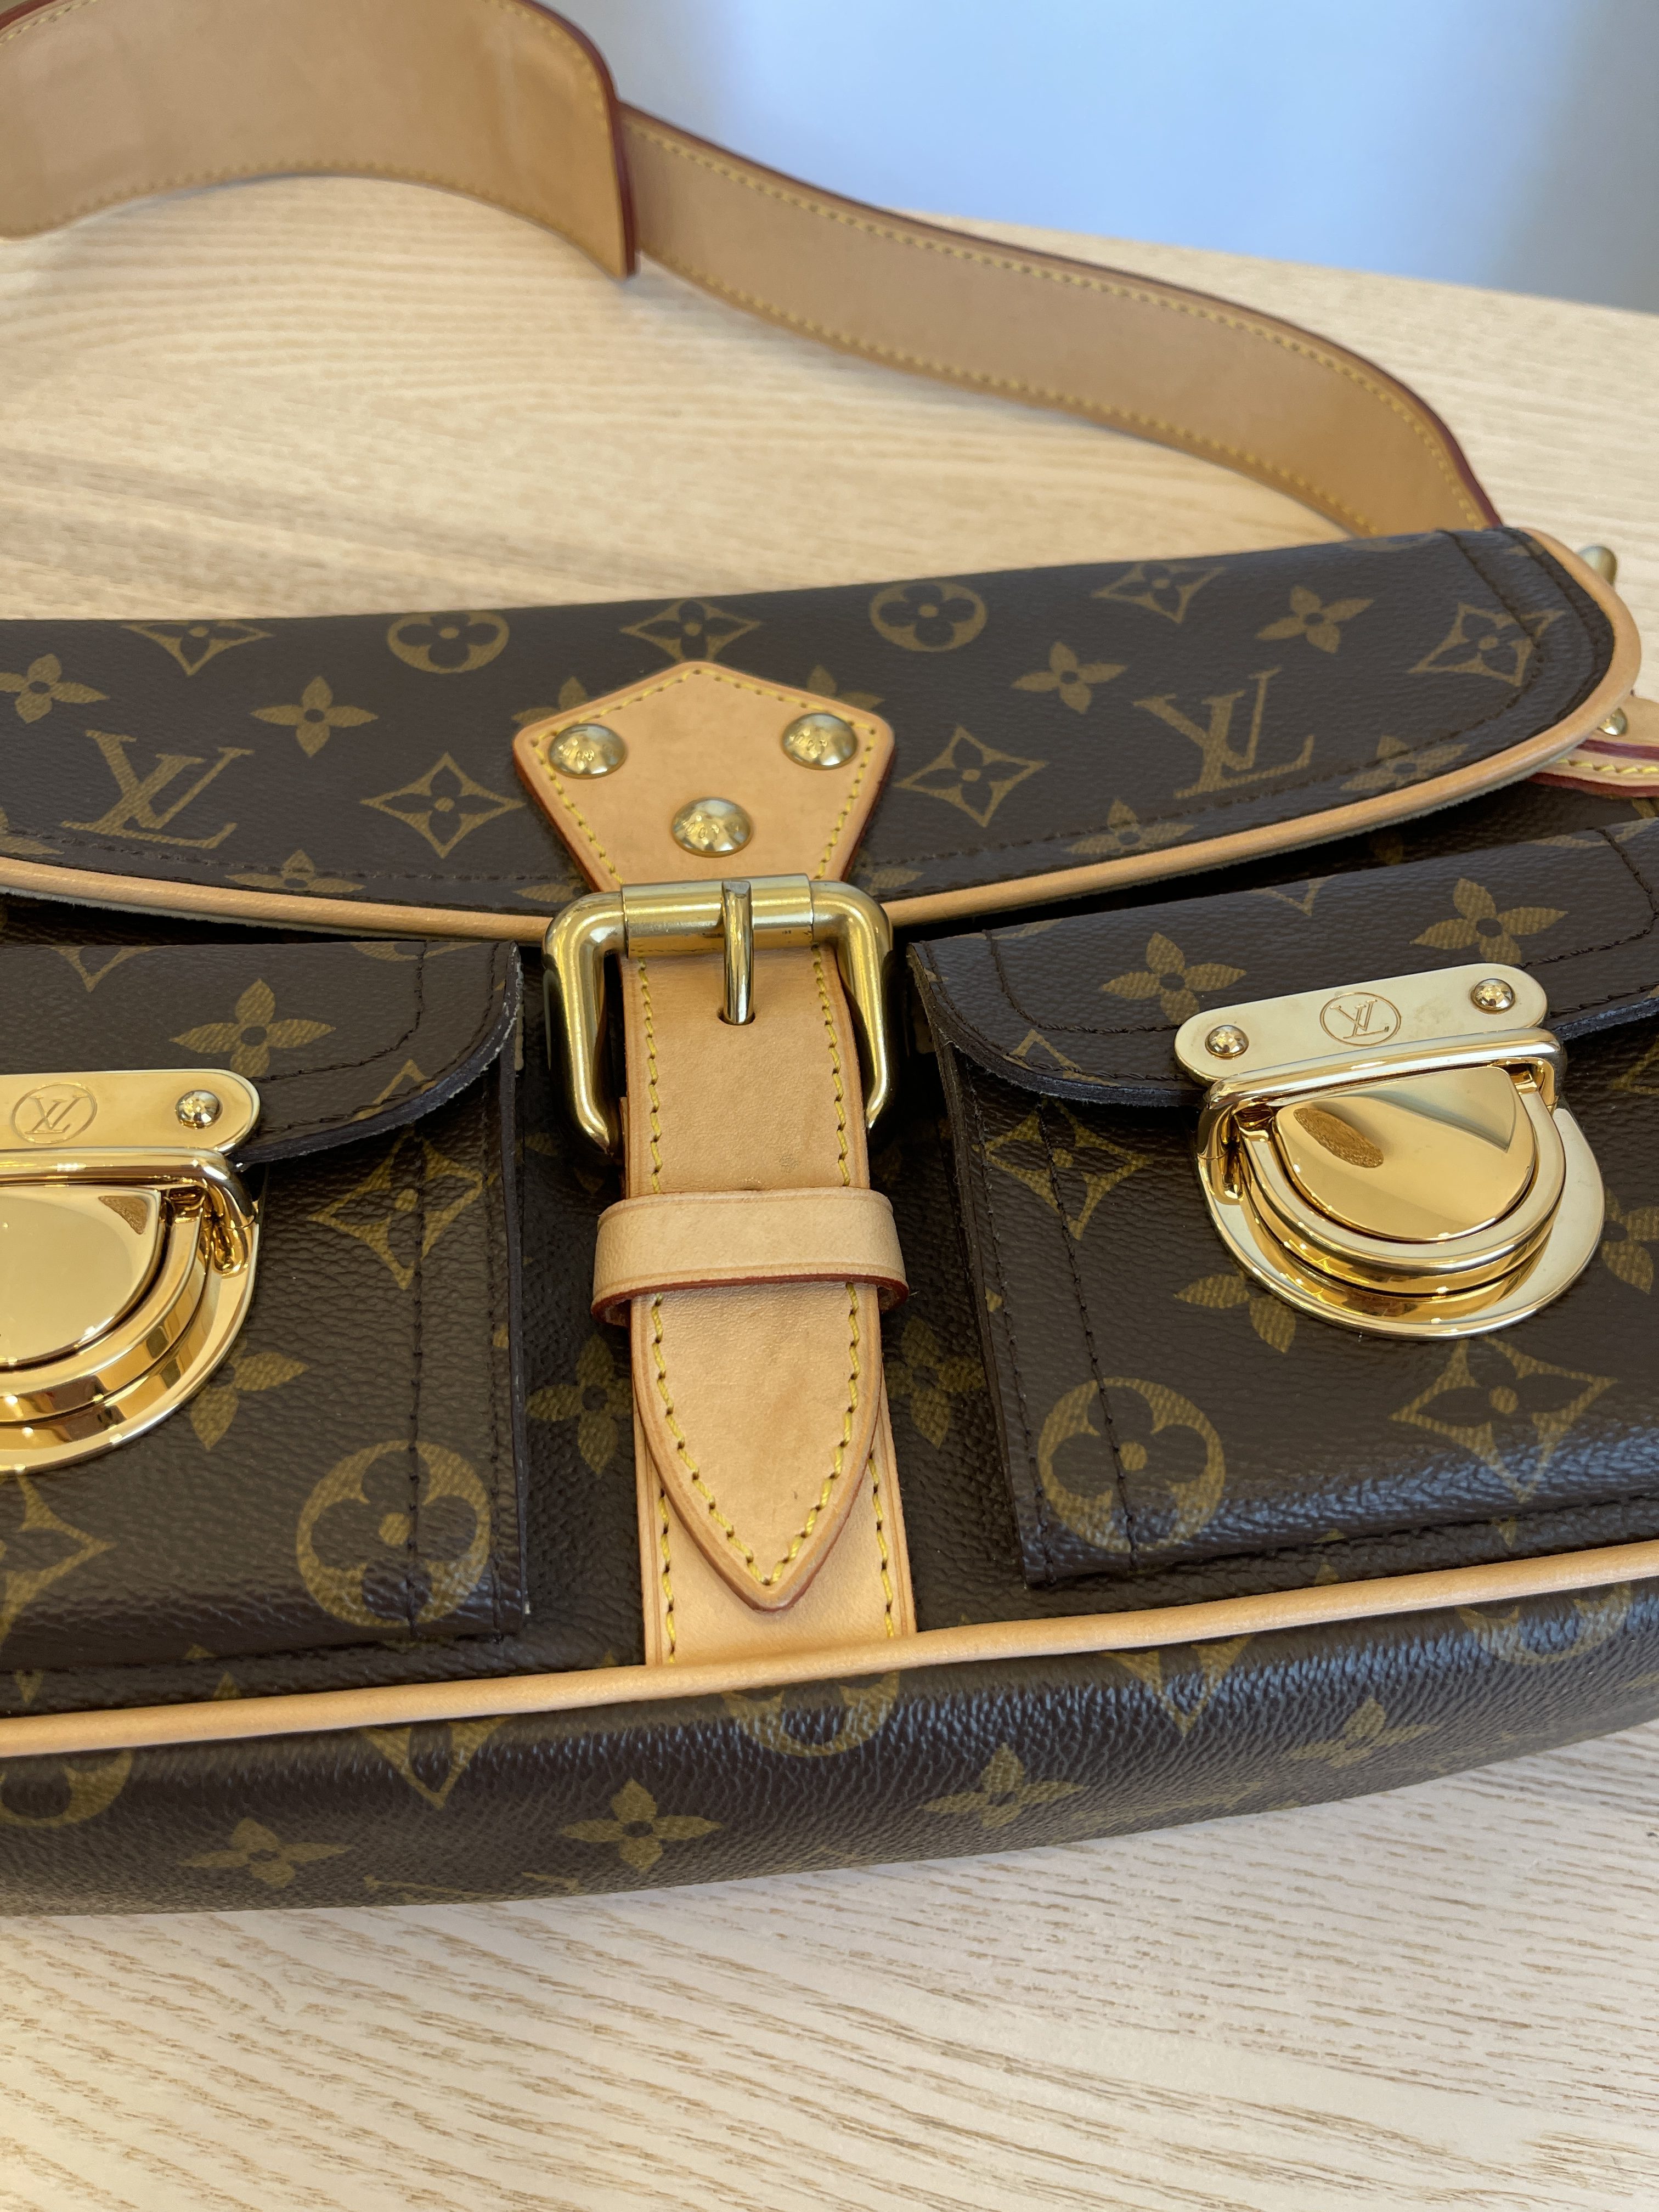 Louis Vuitton Hudson in PM - Bags of CharmBags of Charm